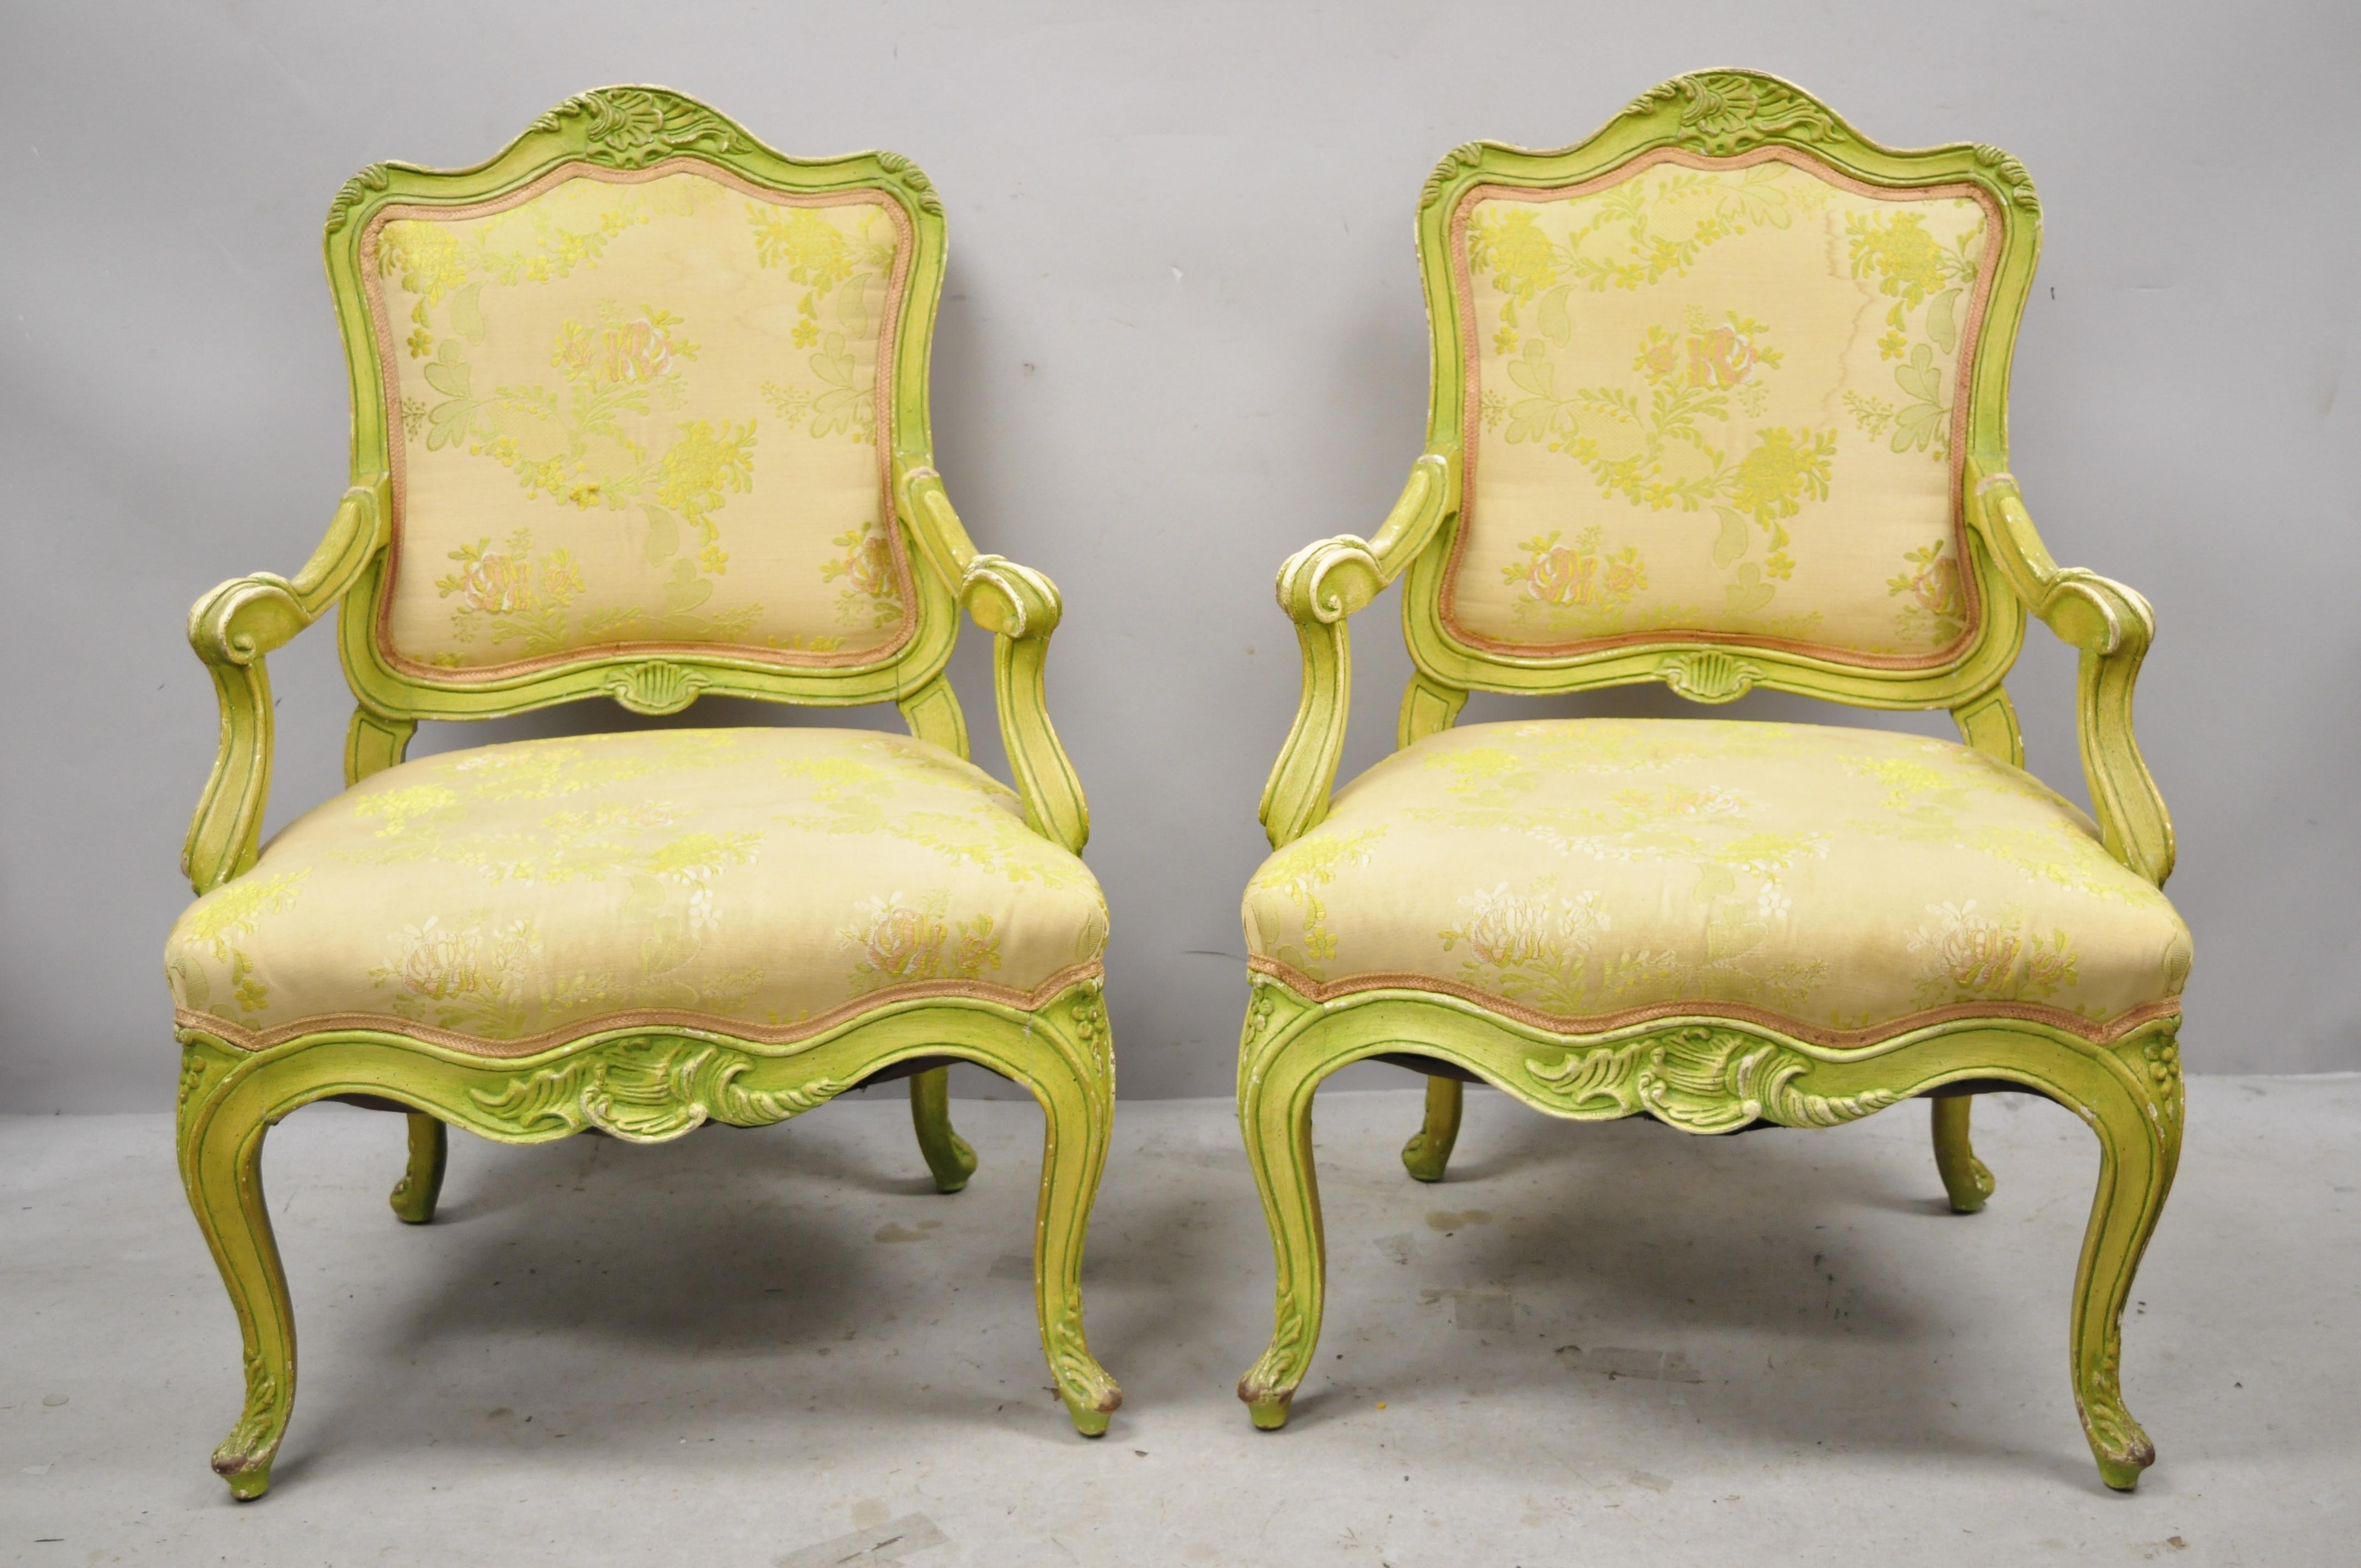 Vintage Italian Rococo Hollywood Regency green painted fireside lounge armchairs, a pair. Item features distressed green painted finish, solid wood frame, nicely carved details, very nice vintage pair, great style and form, circa mid-20th century.